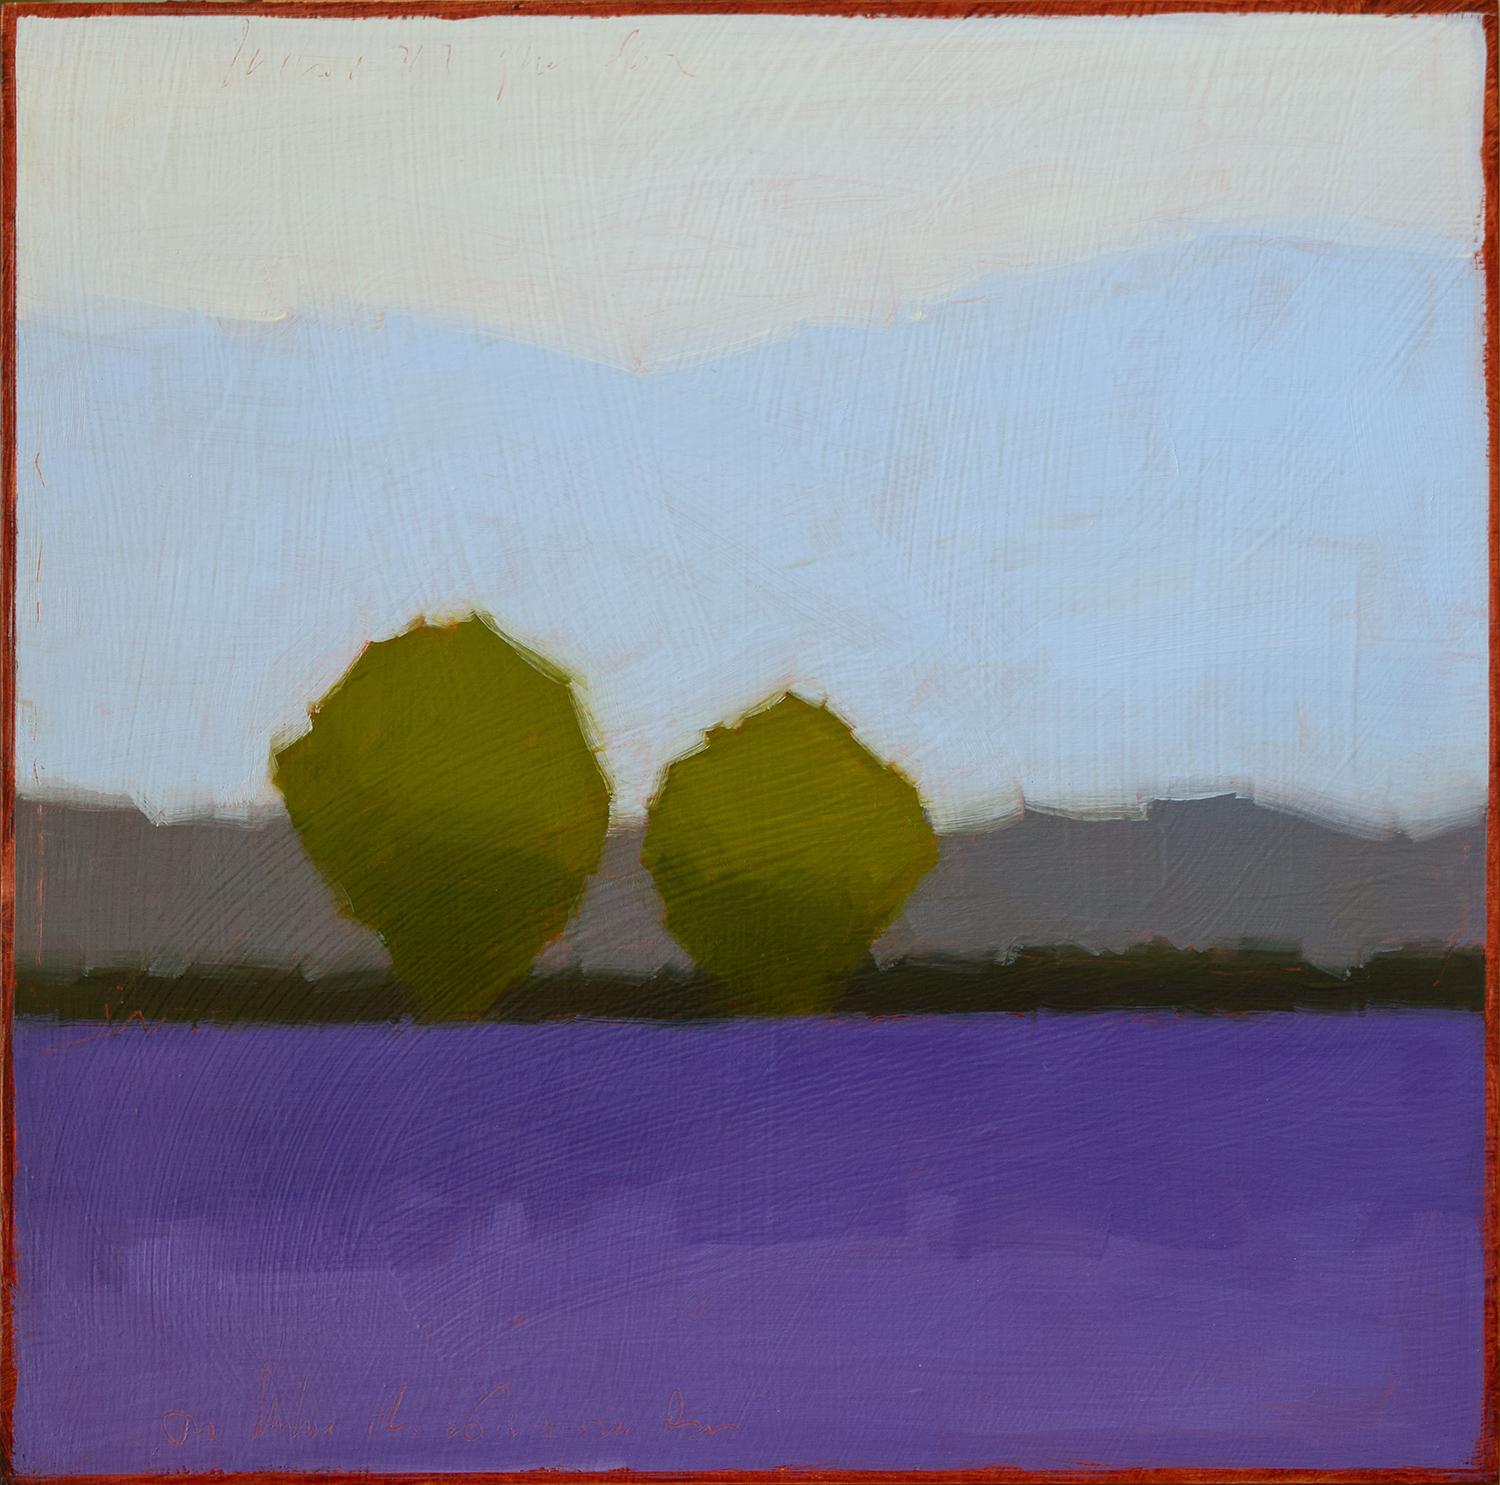 Two Olive Trees (Color Field Painting of a Rural Landscape by Tracy Helgeson)
10 x 10 x 2 inches, oil on birch panel
Tracy Helgeson plays on the idea of color field painting with rural landscapes saturated in improbable hues. Helgeson literalizes